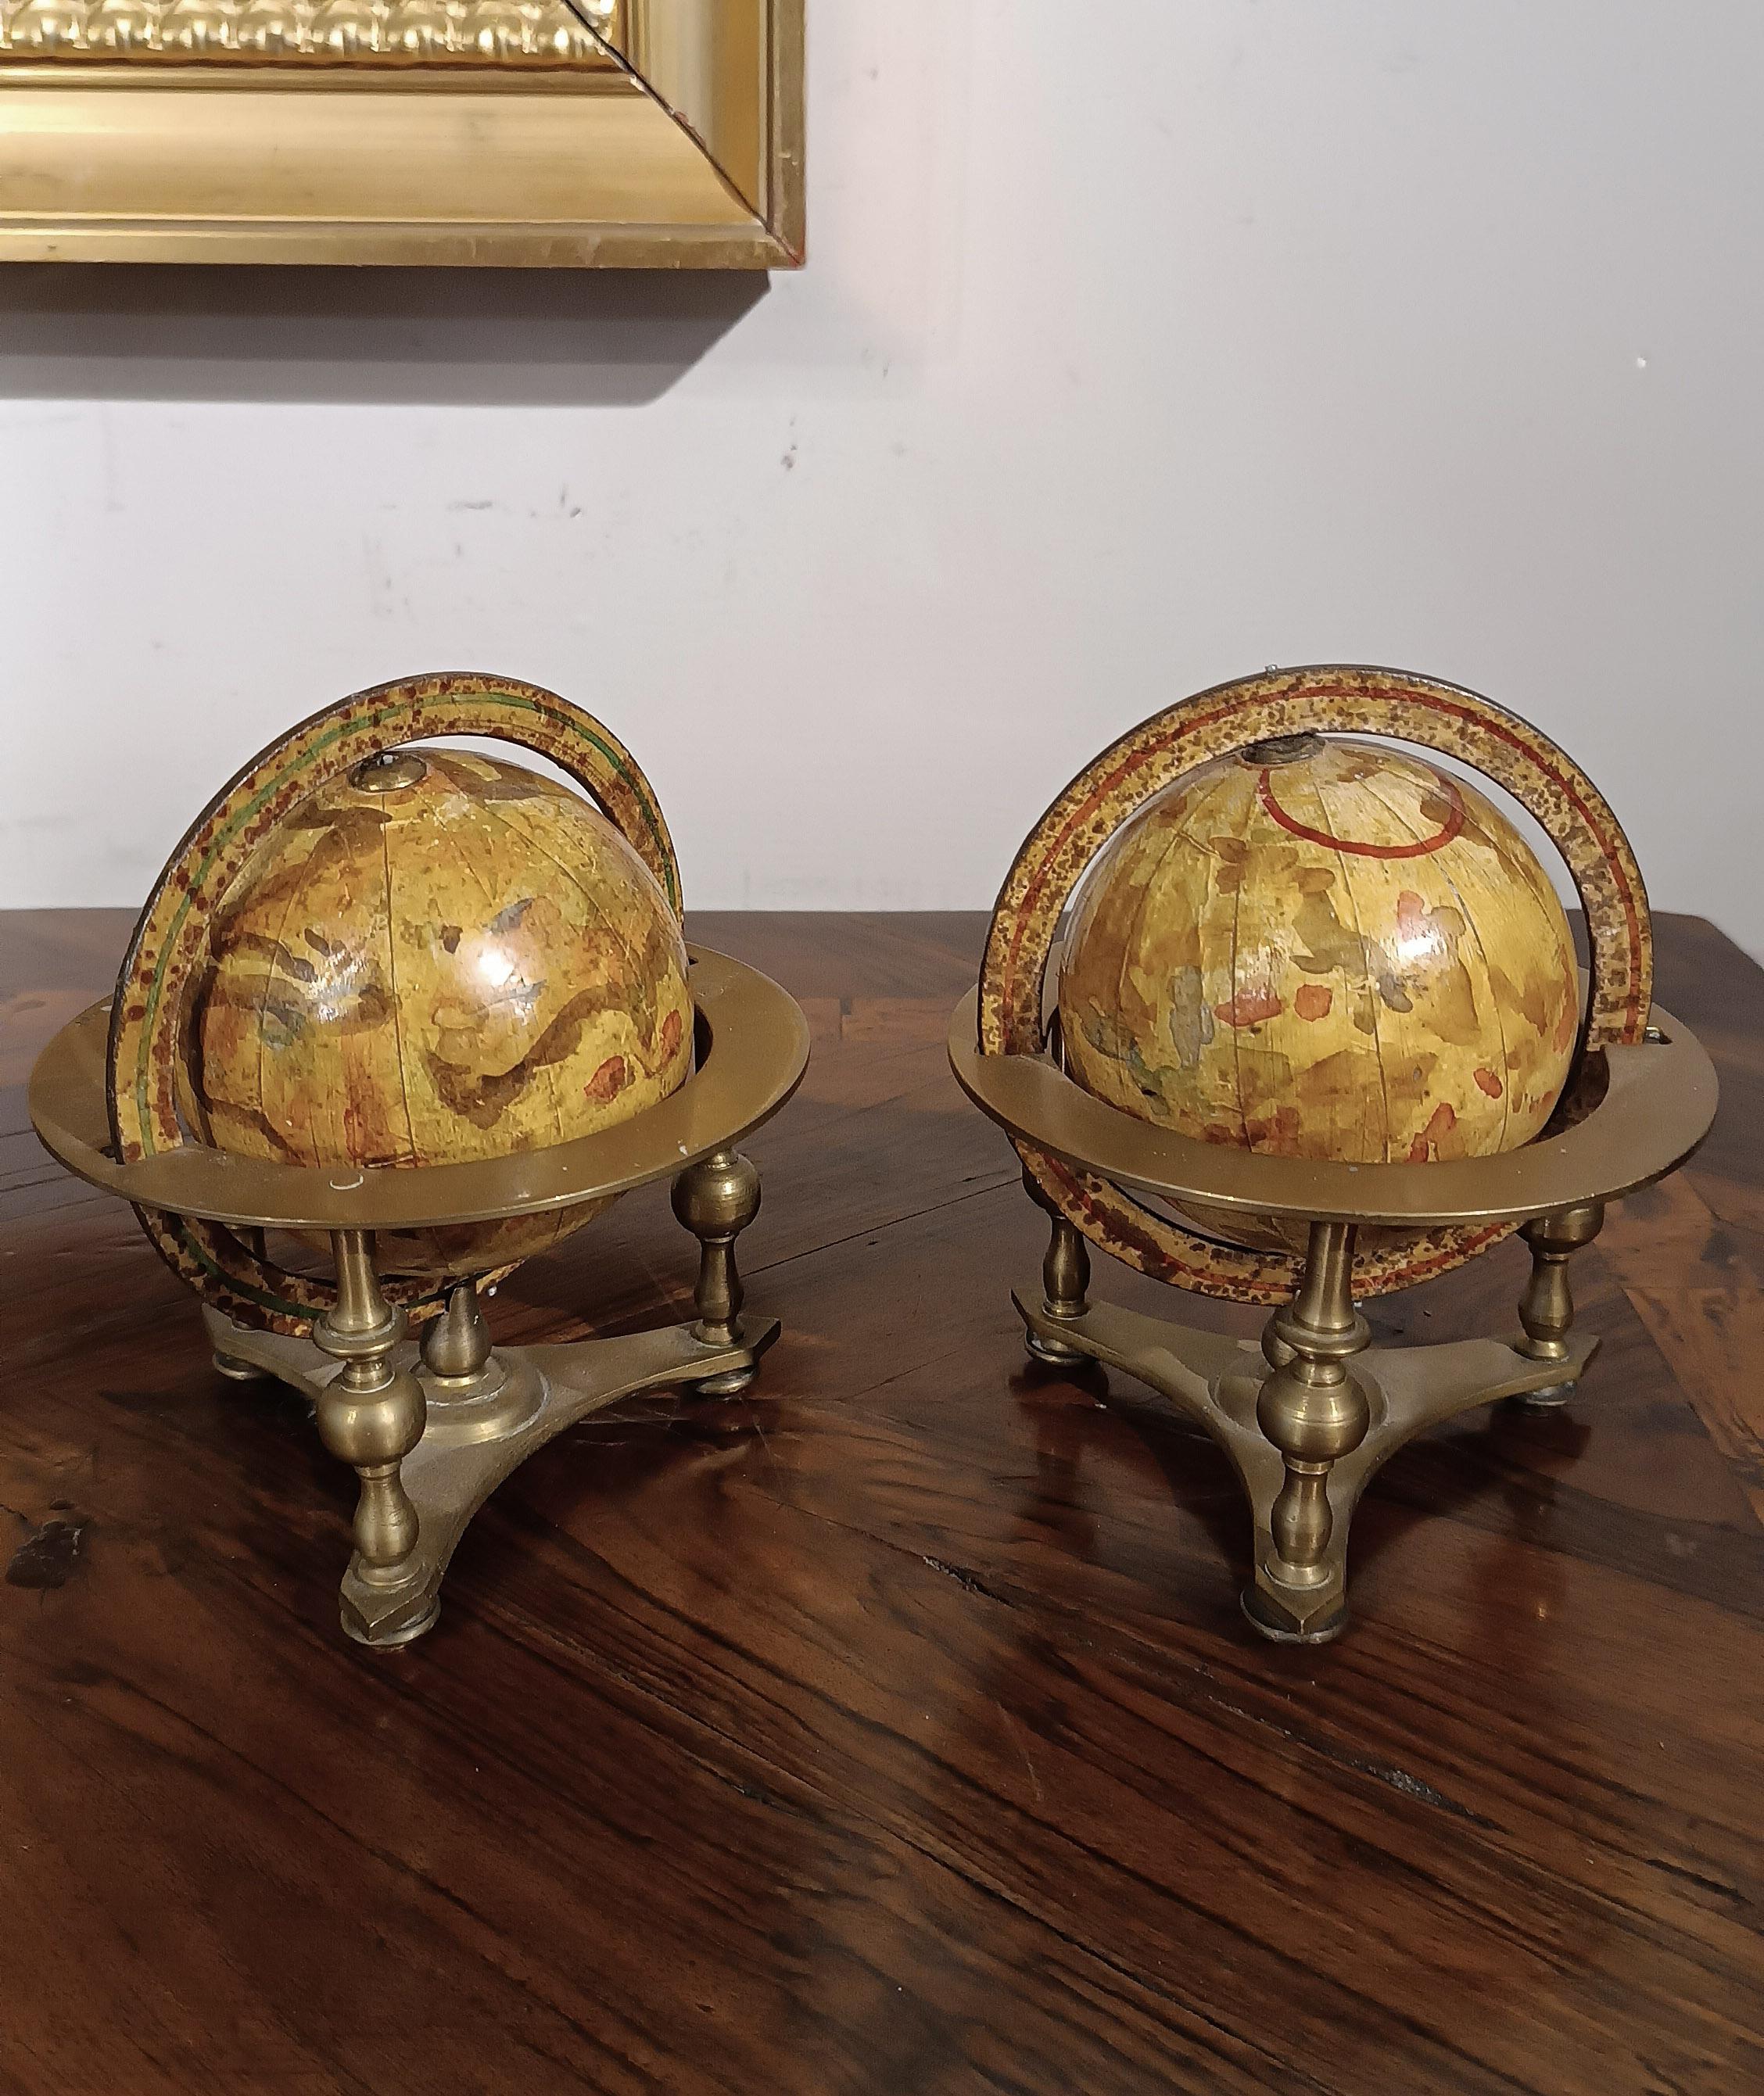 19th CENTURY PAIR OF SMALL WORLD GLOBES For Sale 5